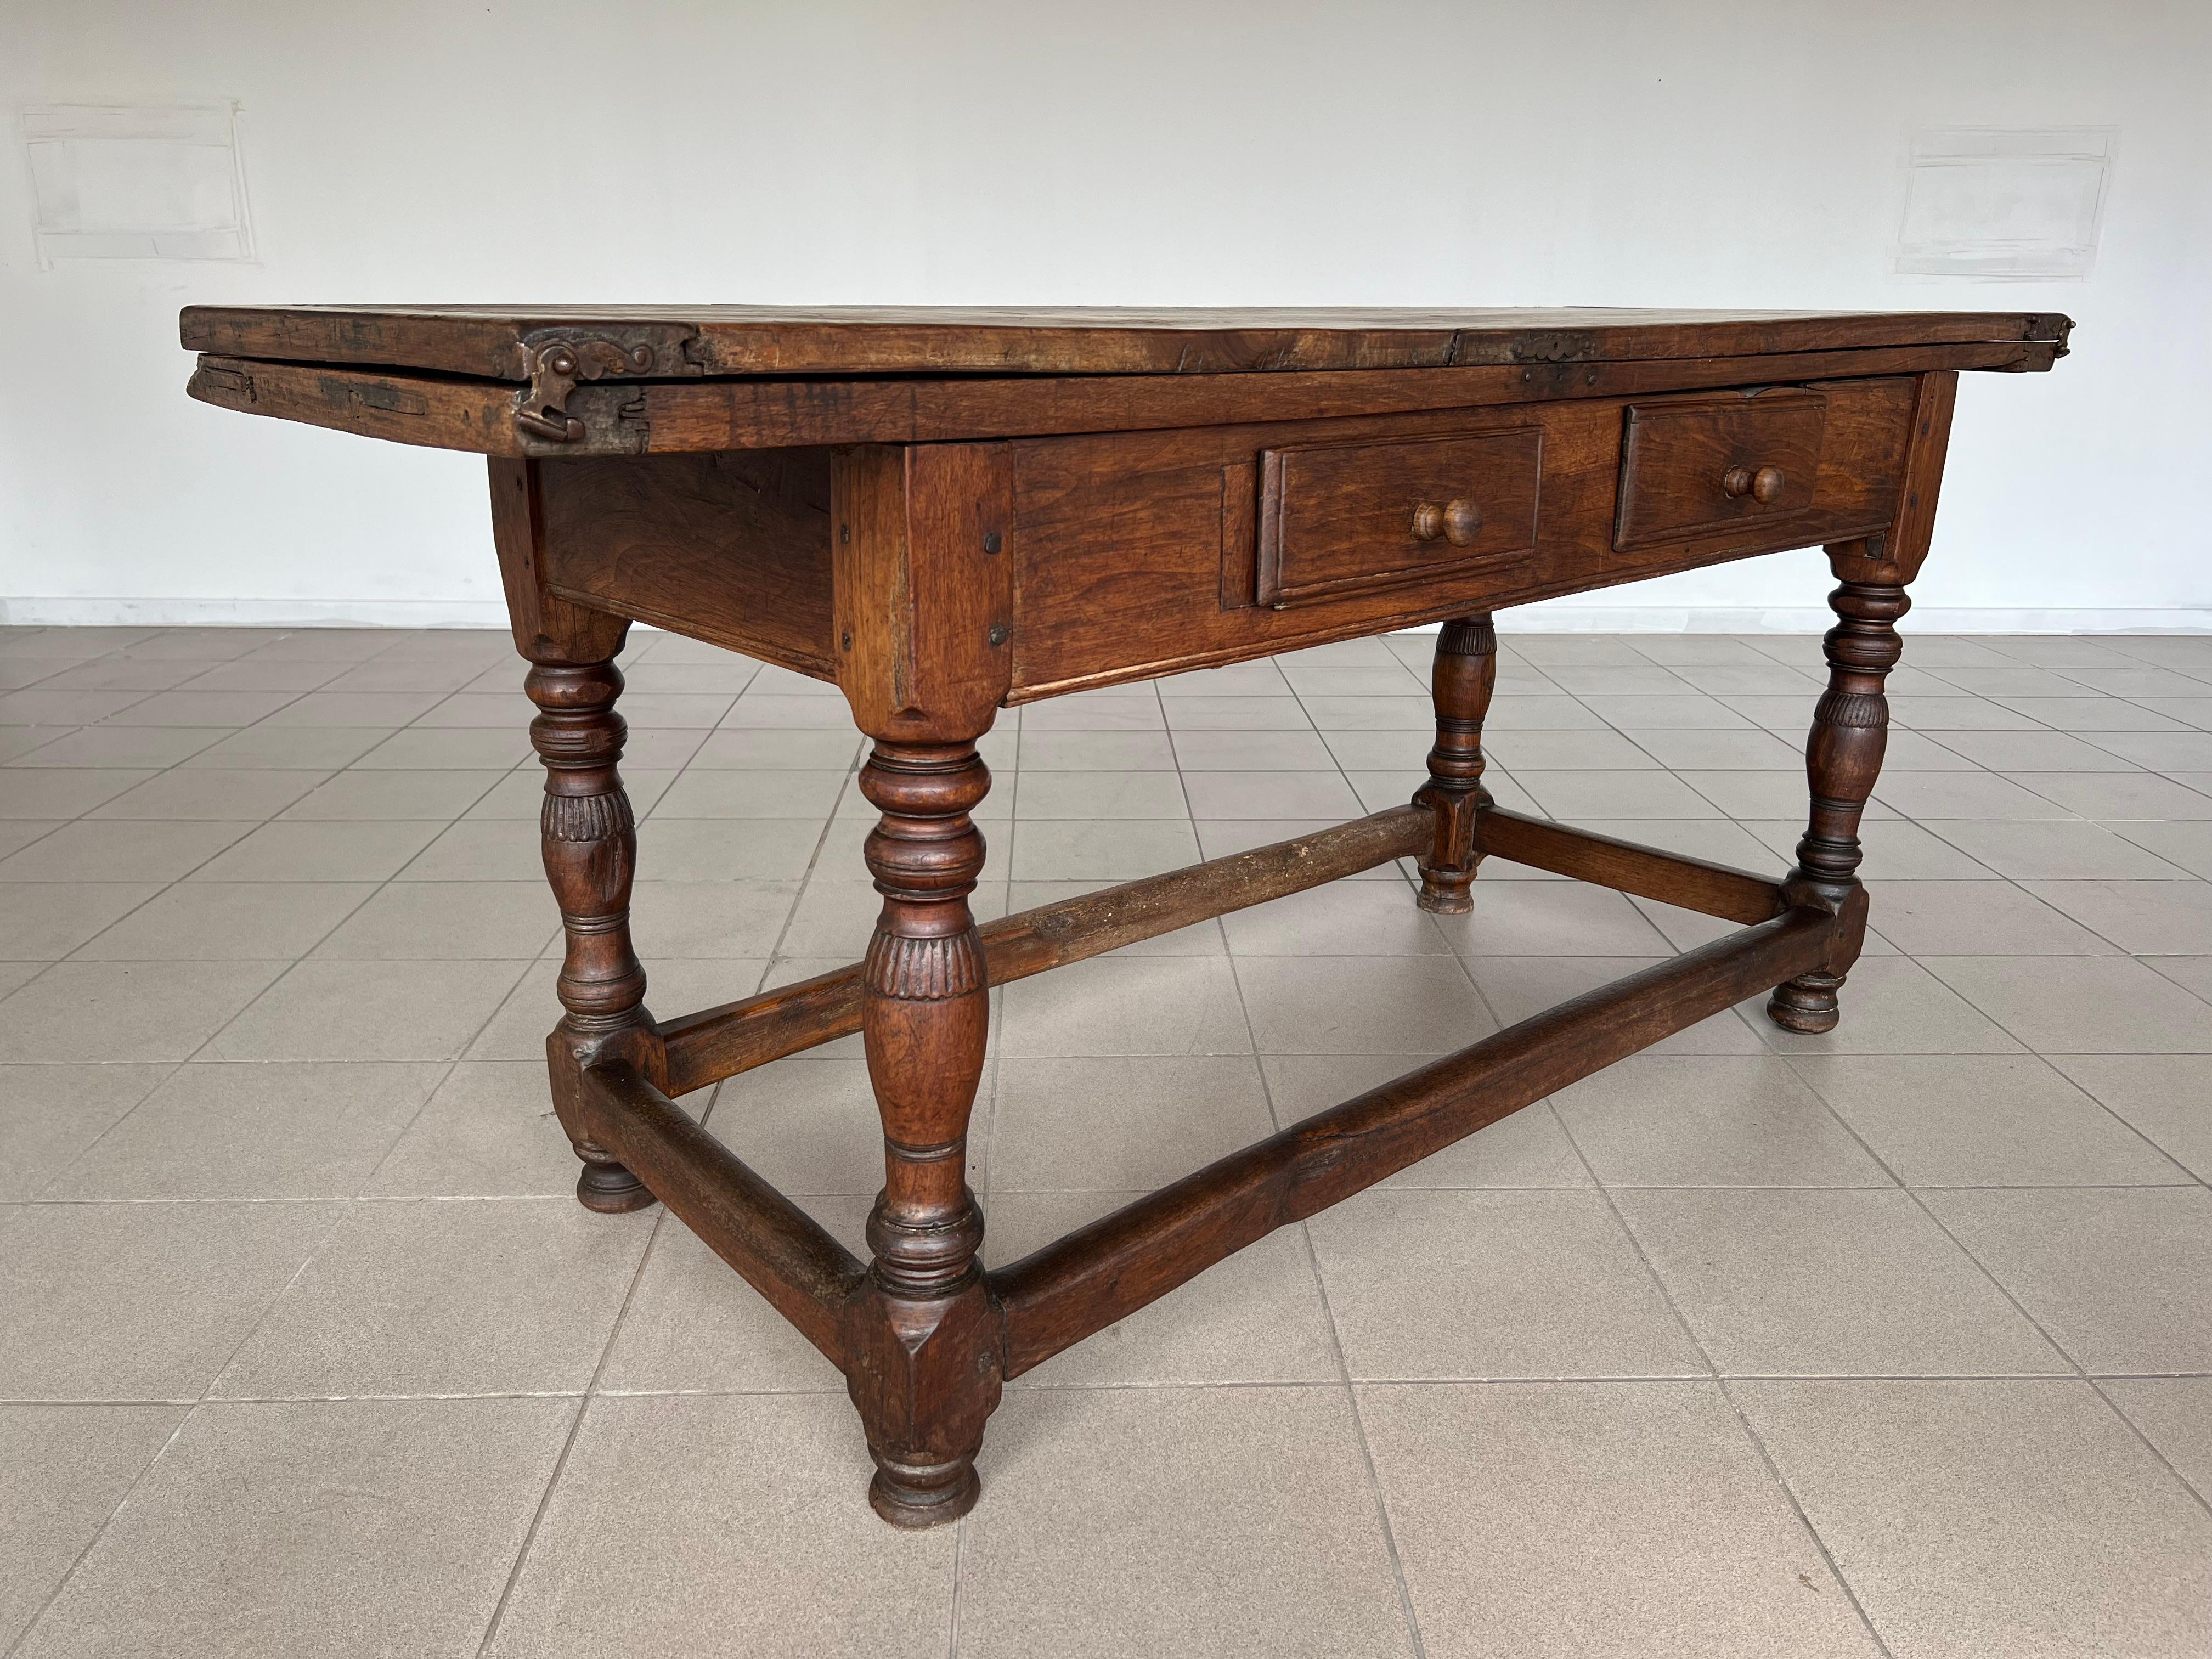 Rare 18c Swiss French Alp Rustic Flip Top Dining Table or Desk With Two Drawers For Sale 10